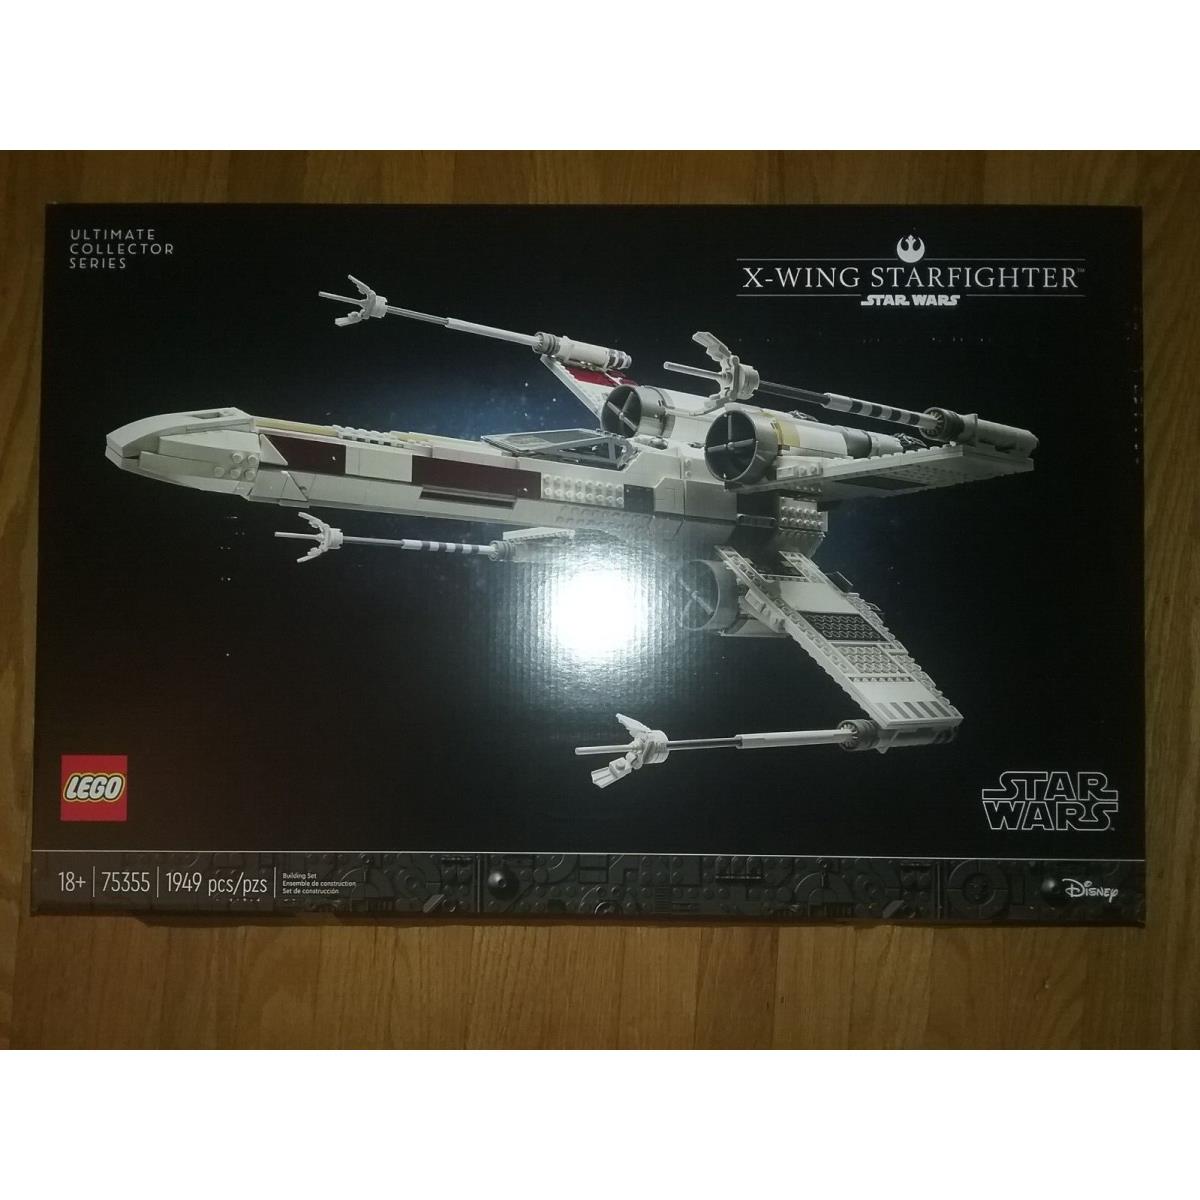 Lego 75355 Star Wars X-wing Star Fighter Ultimate Collector Series 1949 Pieces